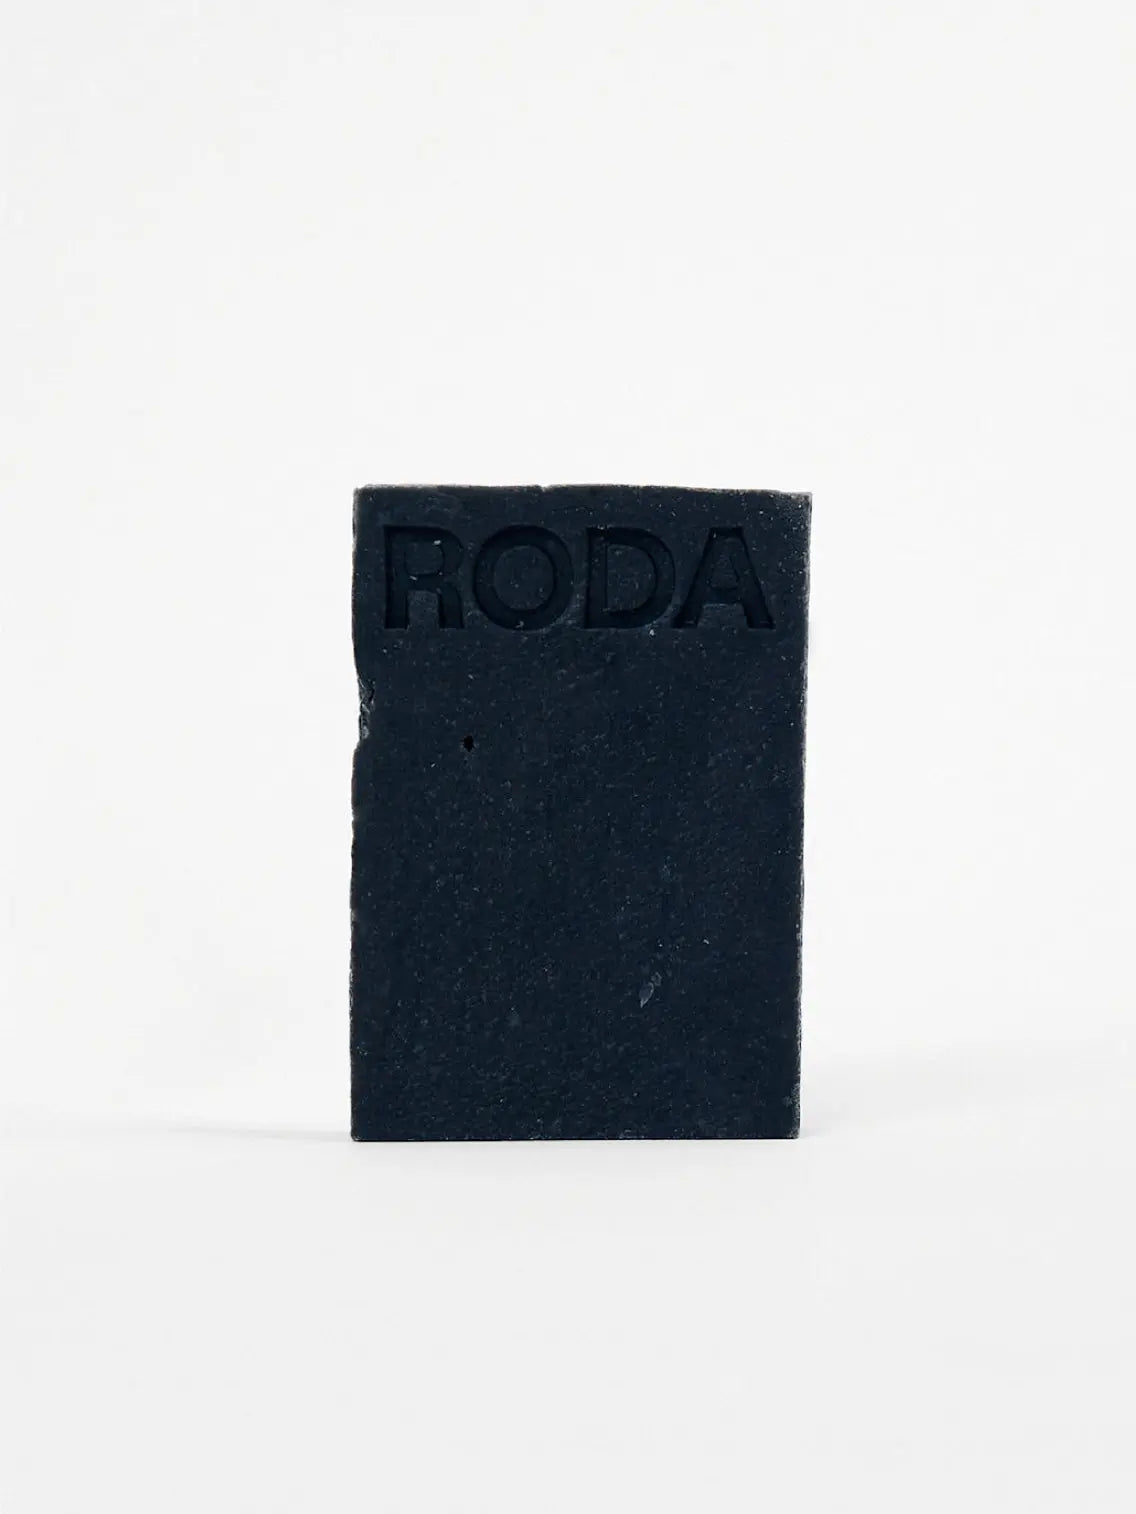 A rectangular, dark-colored bar of soap with the word "RODA" etched into the top section is standing upright against a plain white background, exuding an air of elegance reminiscent of a chic Barcelona boutique. This is the Face & Body Soap Bar - Activated Charcoal & Peppermint by Roda.